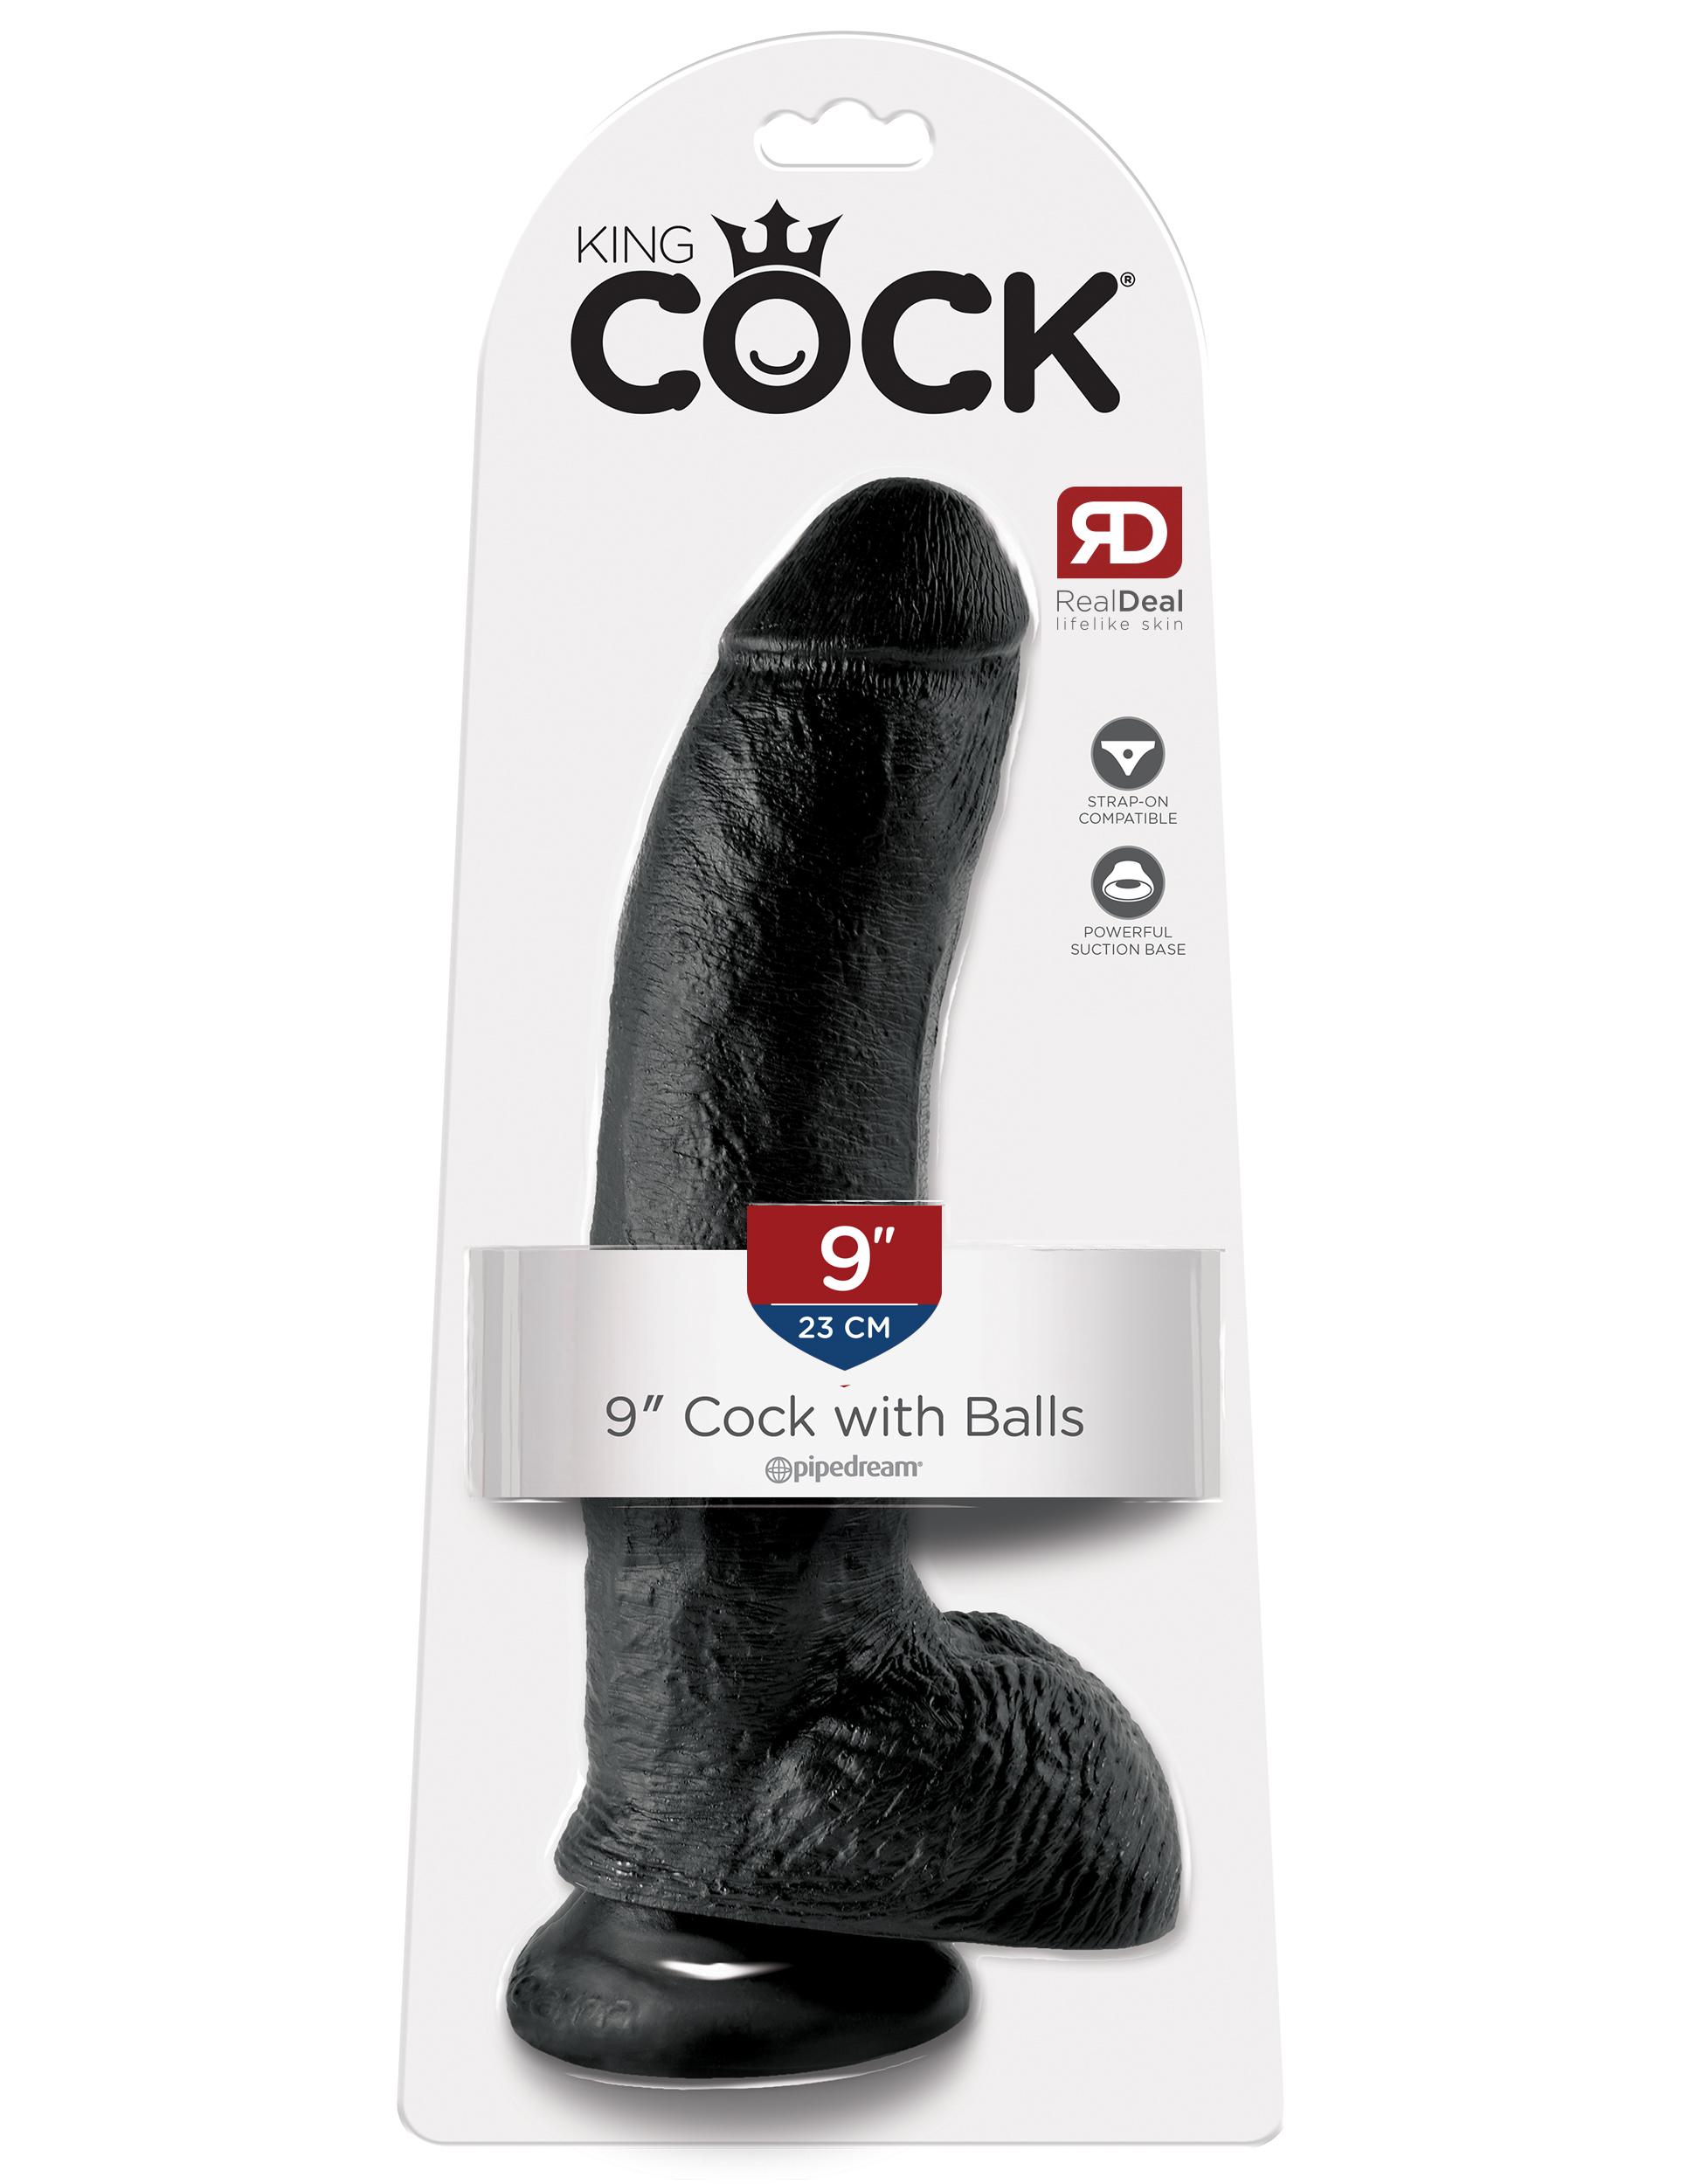 KING COCK Cock with Balls, 23 cm, Black